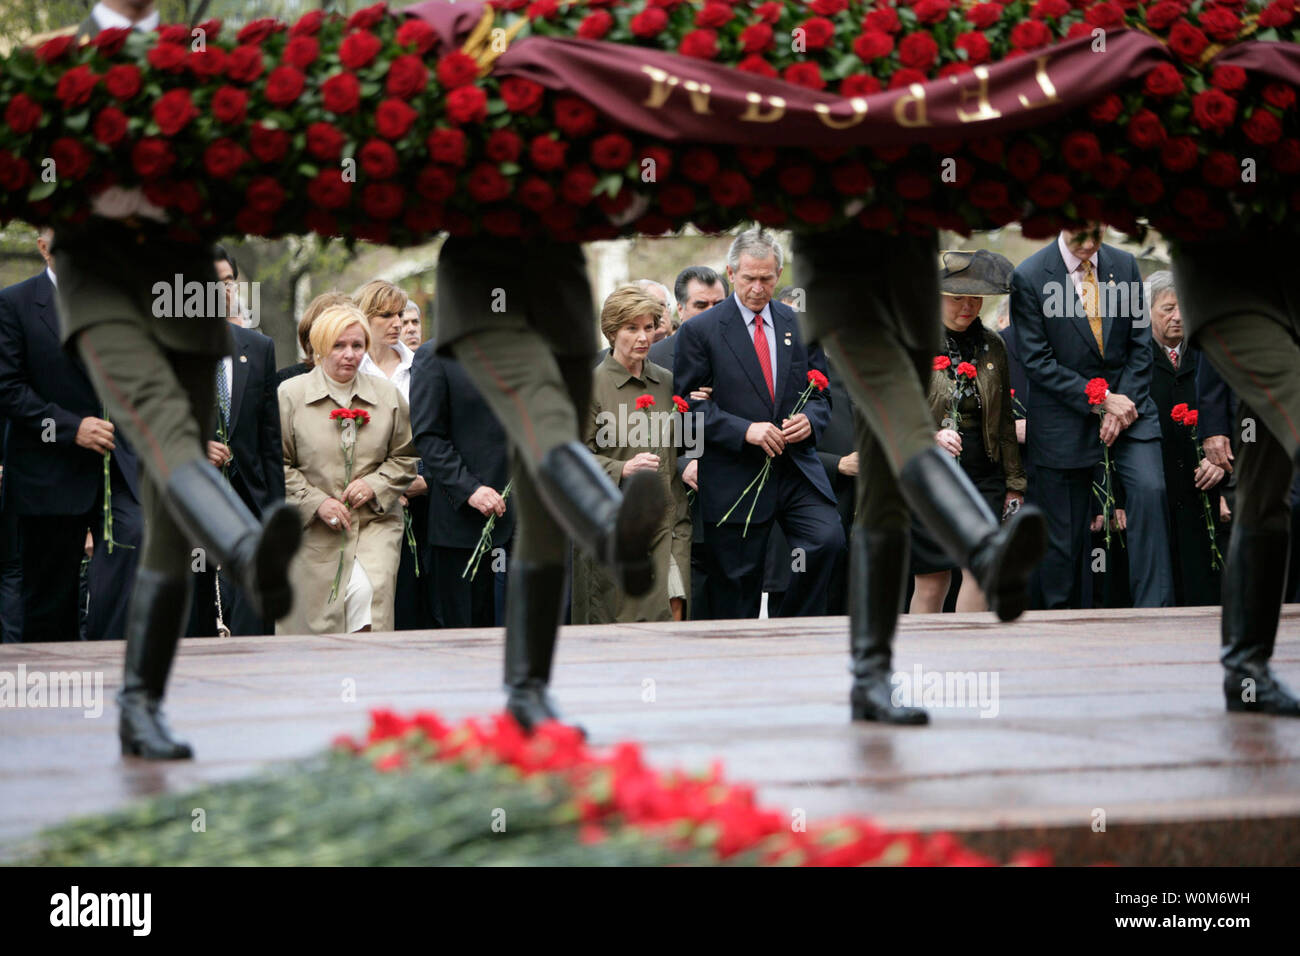 Commemorating the 60th Anniversary of the end of World War II, President George W. Bush and Laura Bush join world leaders in a wreath laying ceremony at the Tomb of the Unknown Soldier at the Kremlin wall Monday, May 9, 2005. (UPI Photo/Eric Draper/White House) Stock Photo